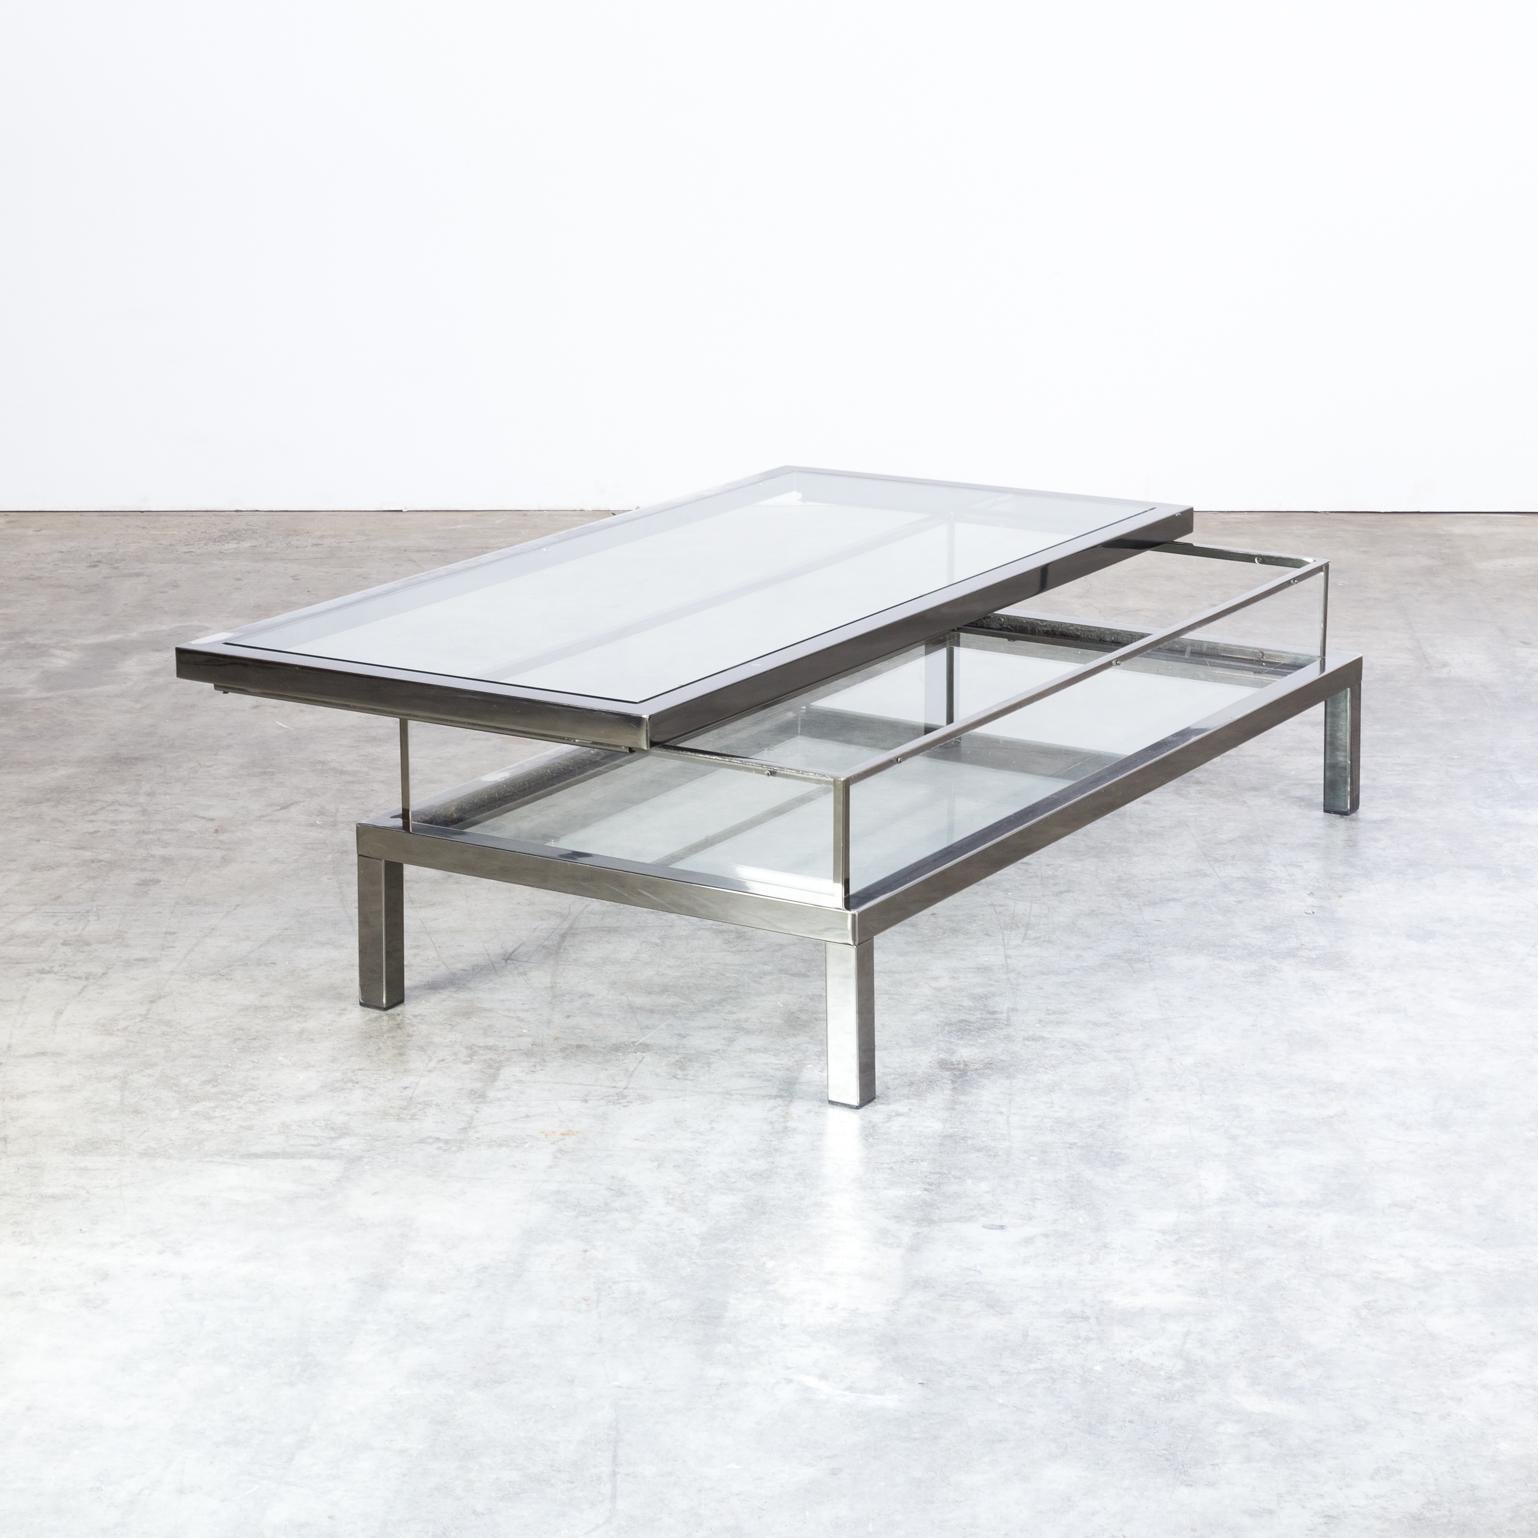 1950s metal and glass French sliding coffee table. Good condition, consistent with age and use.